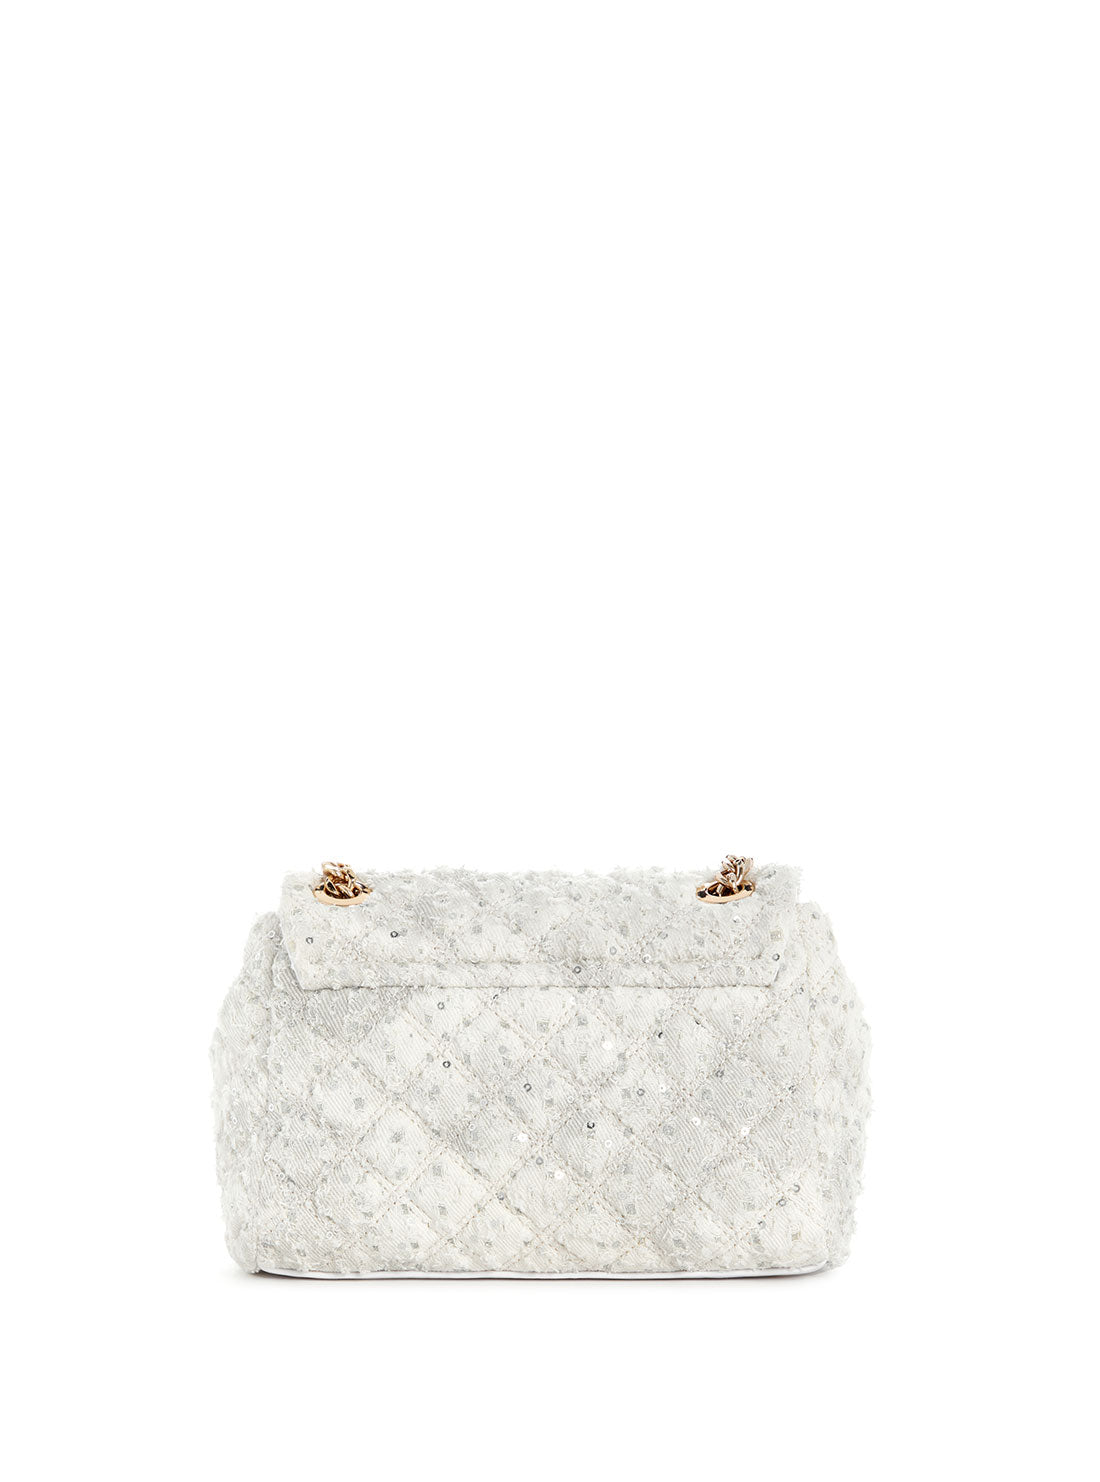 GUESS White Rianee Crossbody Flap Bag back view